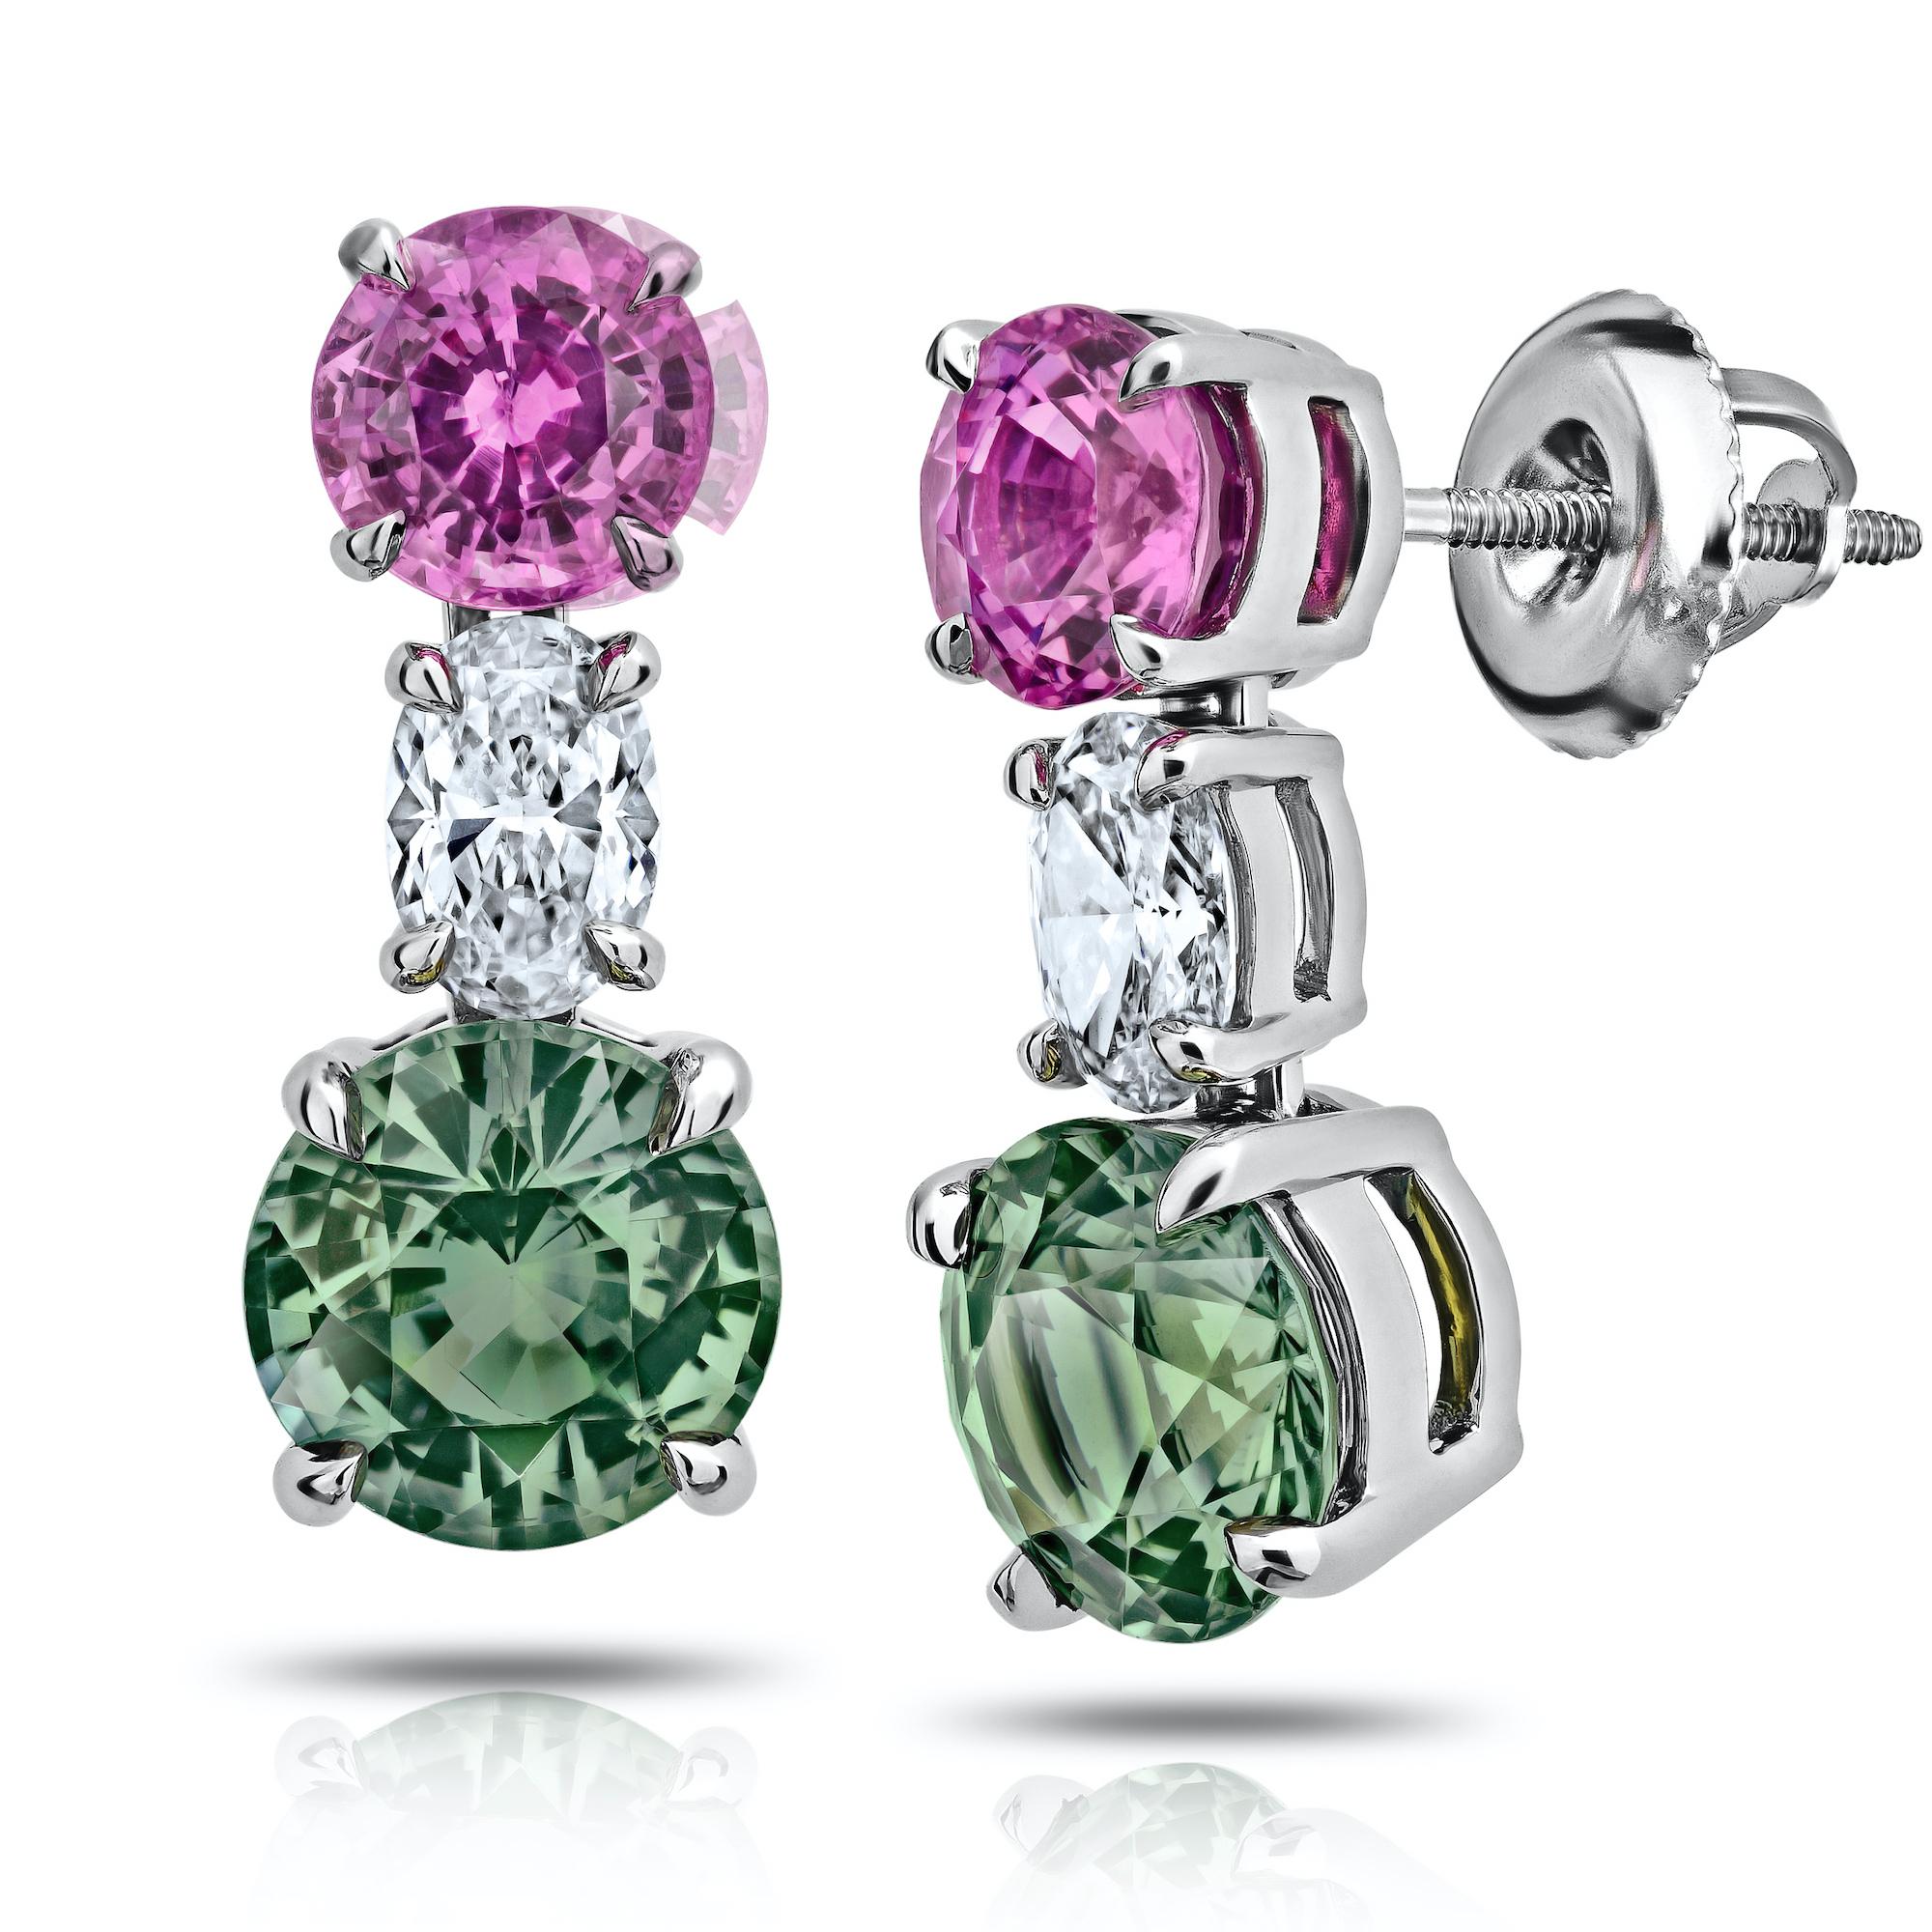 Green (no heat) and Pink Round Sapphire and Diamond Drop Earrings, with a total green Sapphire weight of 2.10 carats and 1.03 carats of pink sapphires plus 0.37 carats of oval Diamonds set on platinum screw backs.